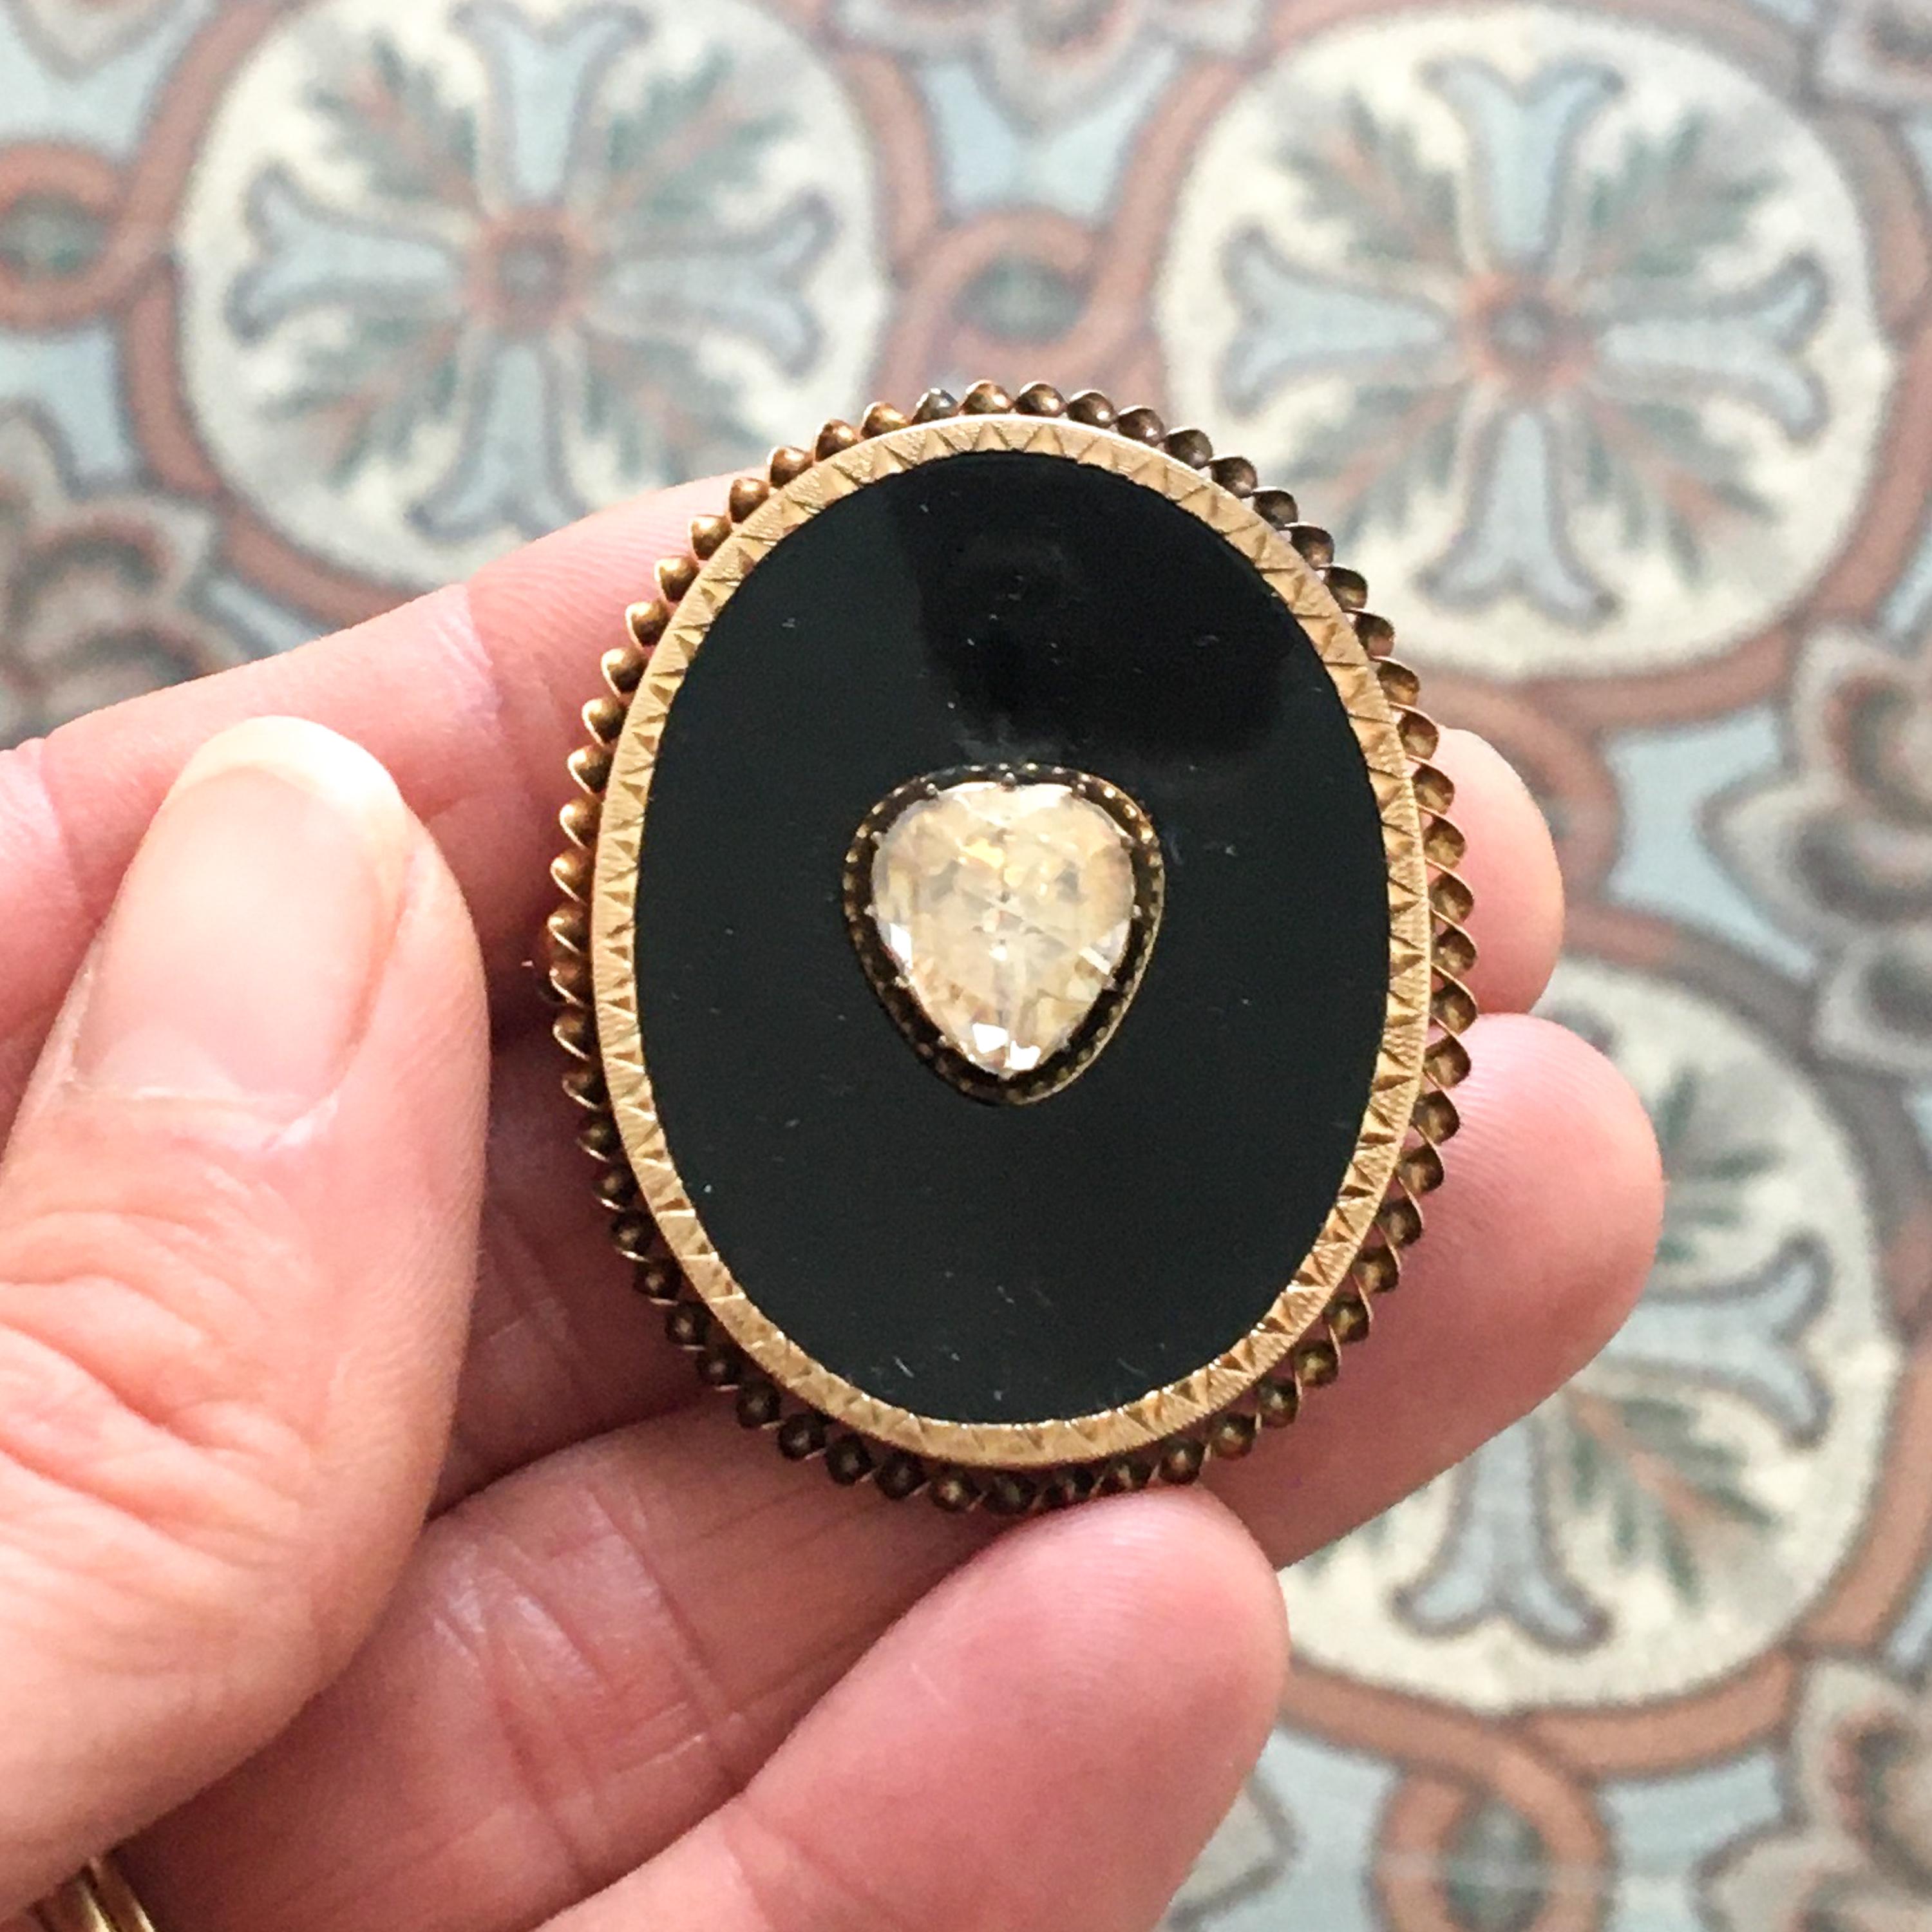 An antique Victorian rose cut diamond and onyx oval pin brooch. The onyx gradually slopes towards the diamond in the center. The heart-shaped diamond is rose cut and bezel set with small prongs on top. The 14 karat gold rim is decorated with small